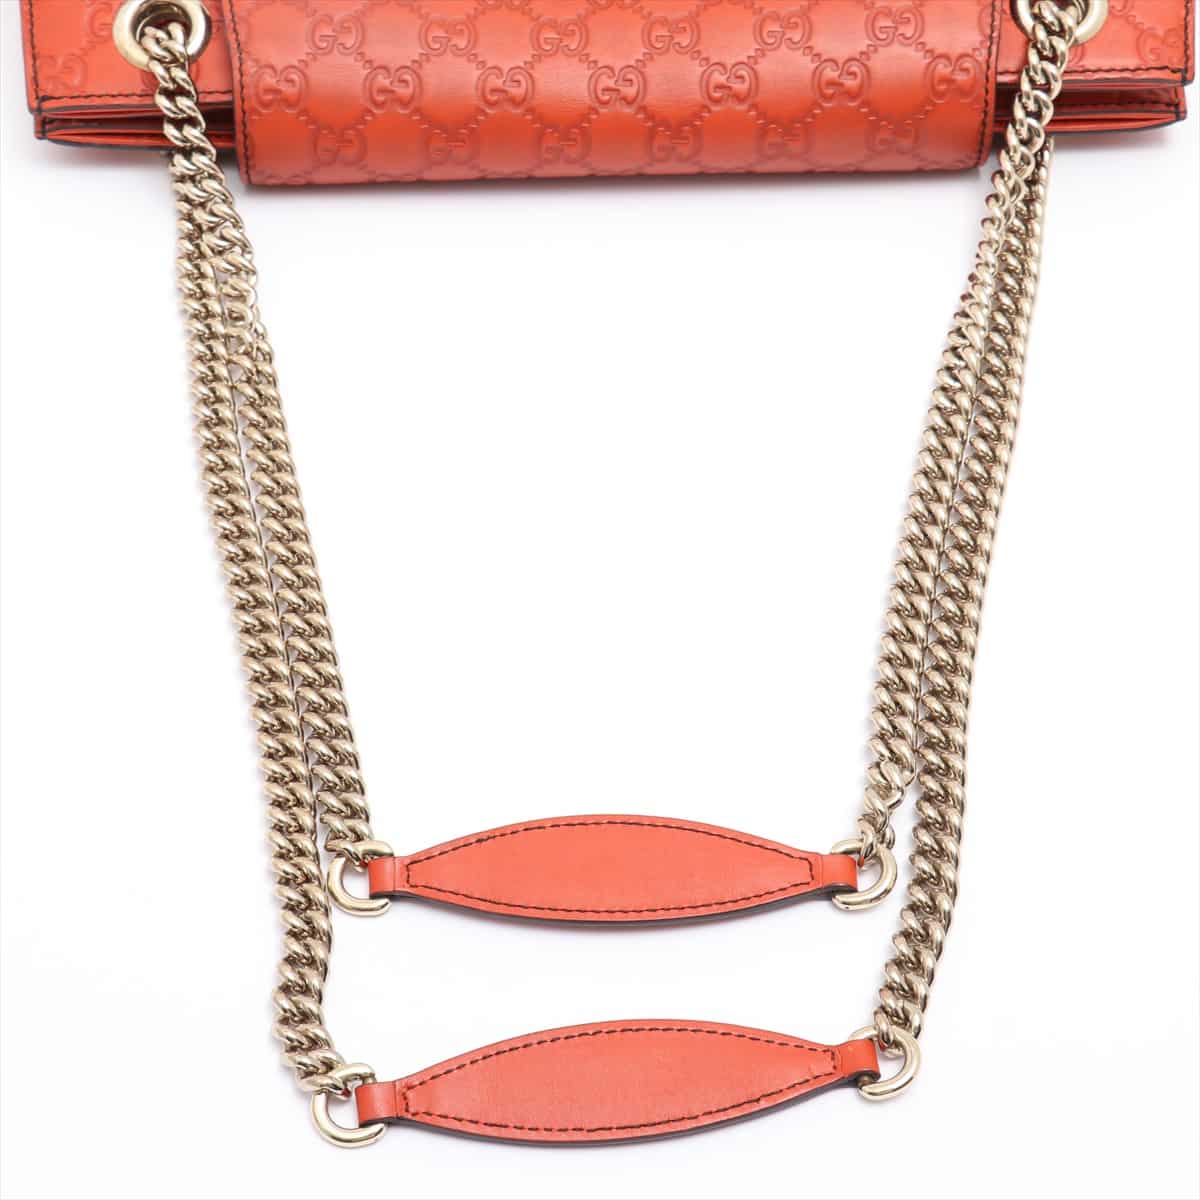 Gucci Emily Guccissima Leather Chain shoulder bag Red 295403